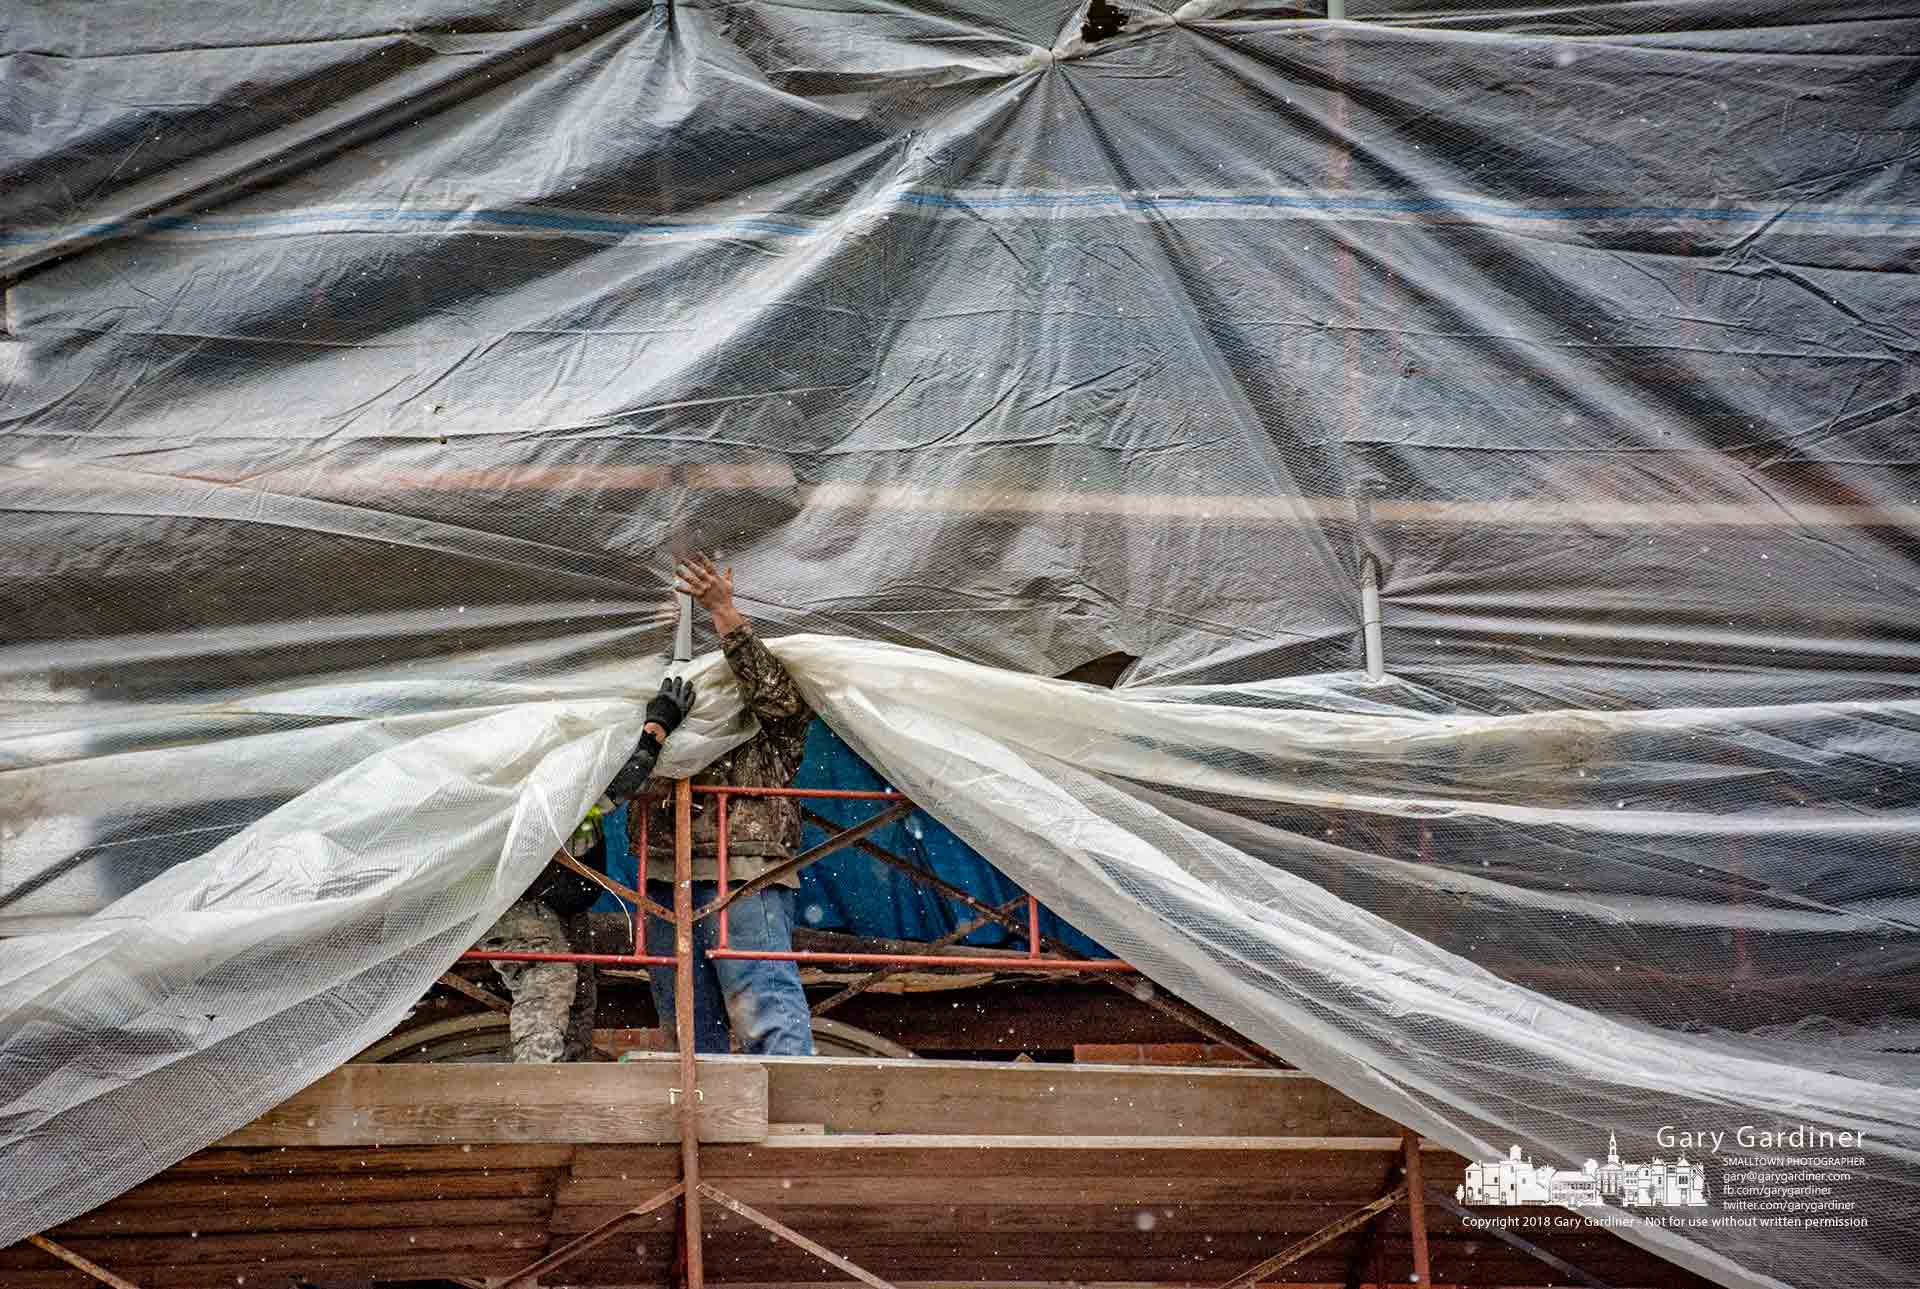 A restoration crew attaches reinforced plastic sheeting to scaffolding above Graeter's as a weather shield as they begin the process of repairing a section of the building after an earlier upgrade revealed problems requiring additional work before installing a new facade. My Final Photo for Dec. 5, 2018.